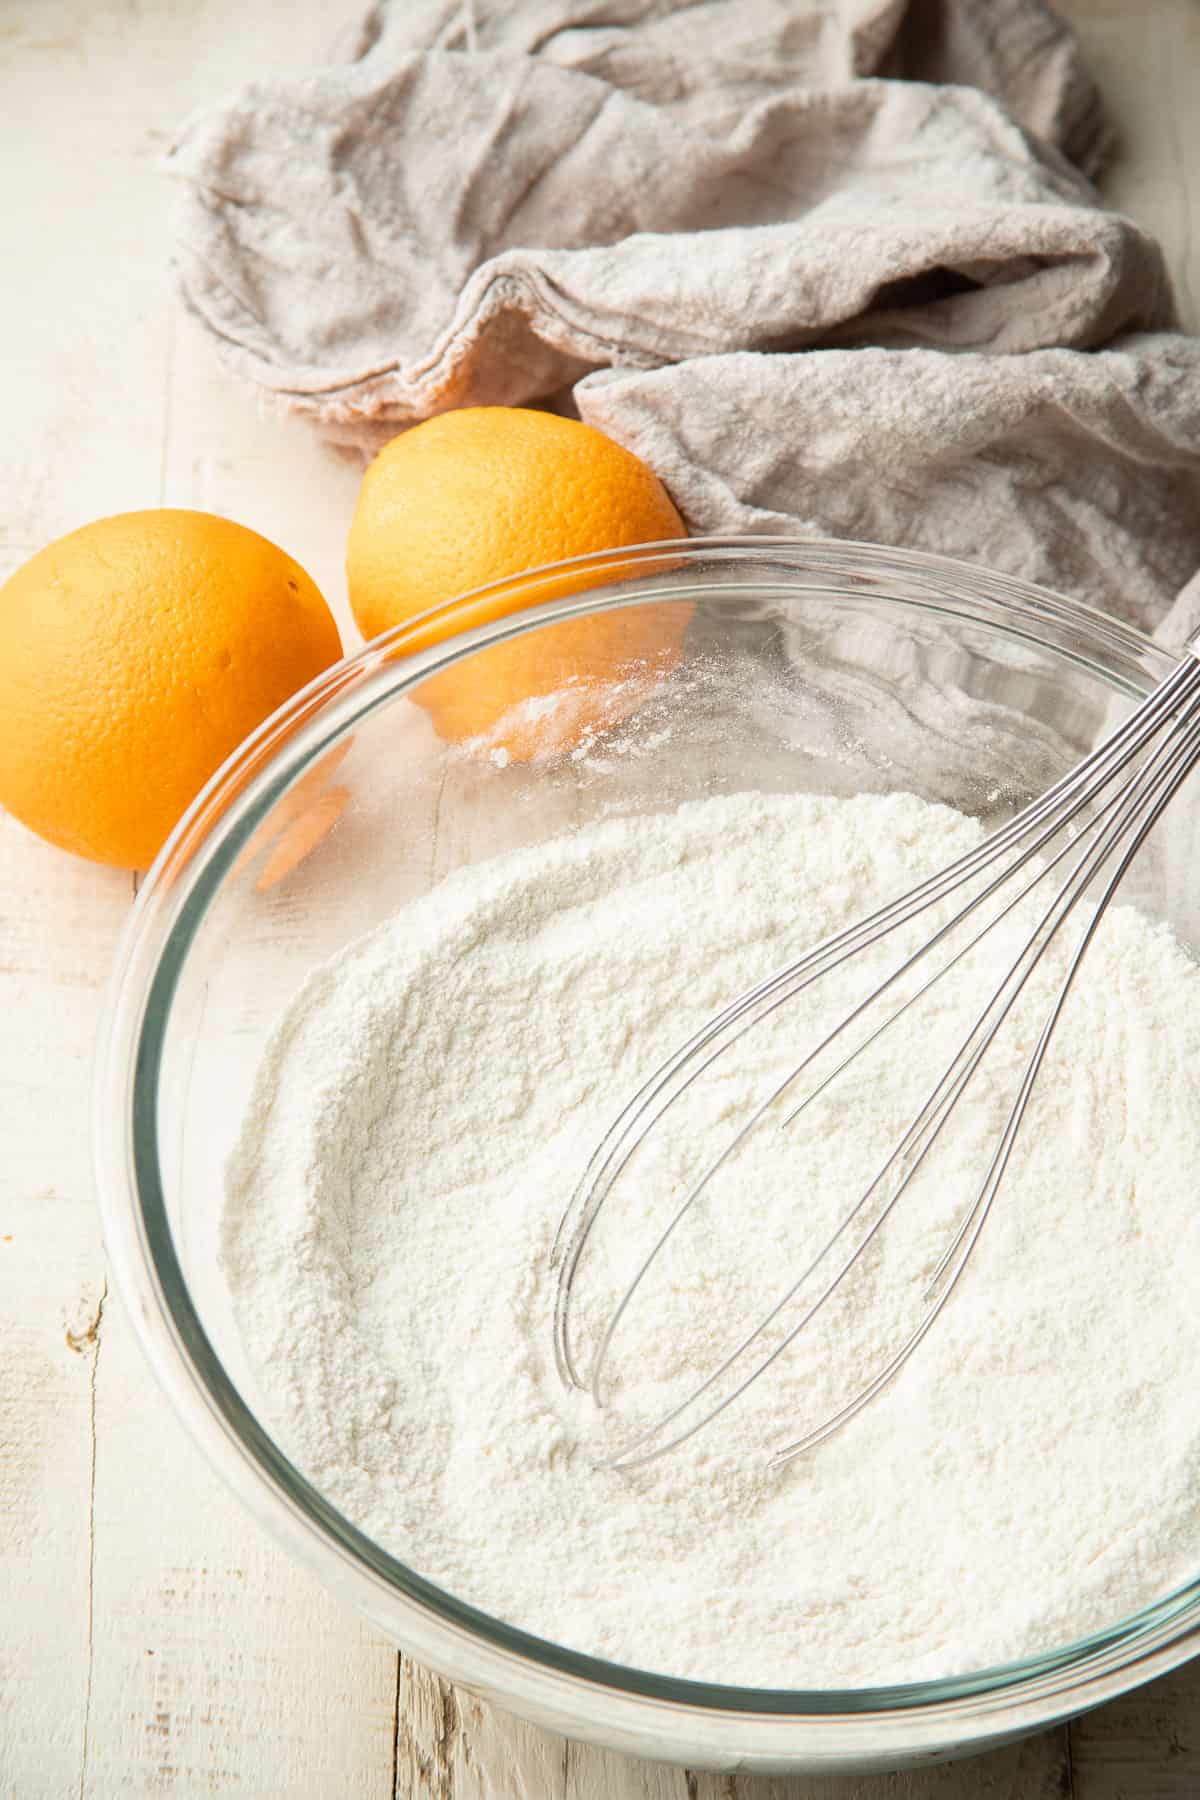 Mix the dry cake ingredients in a mixing bowl.